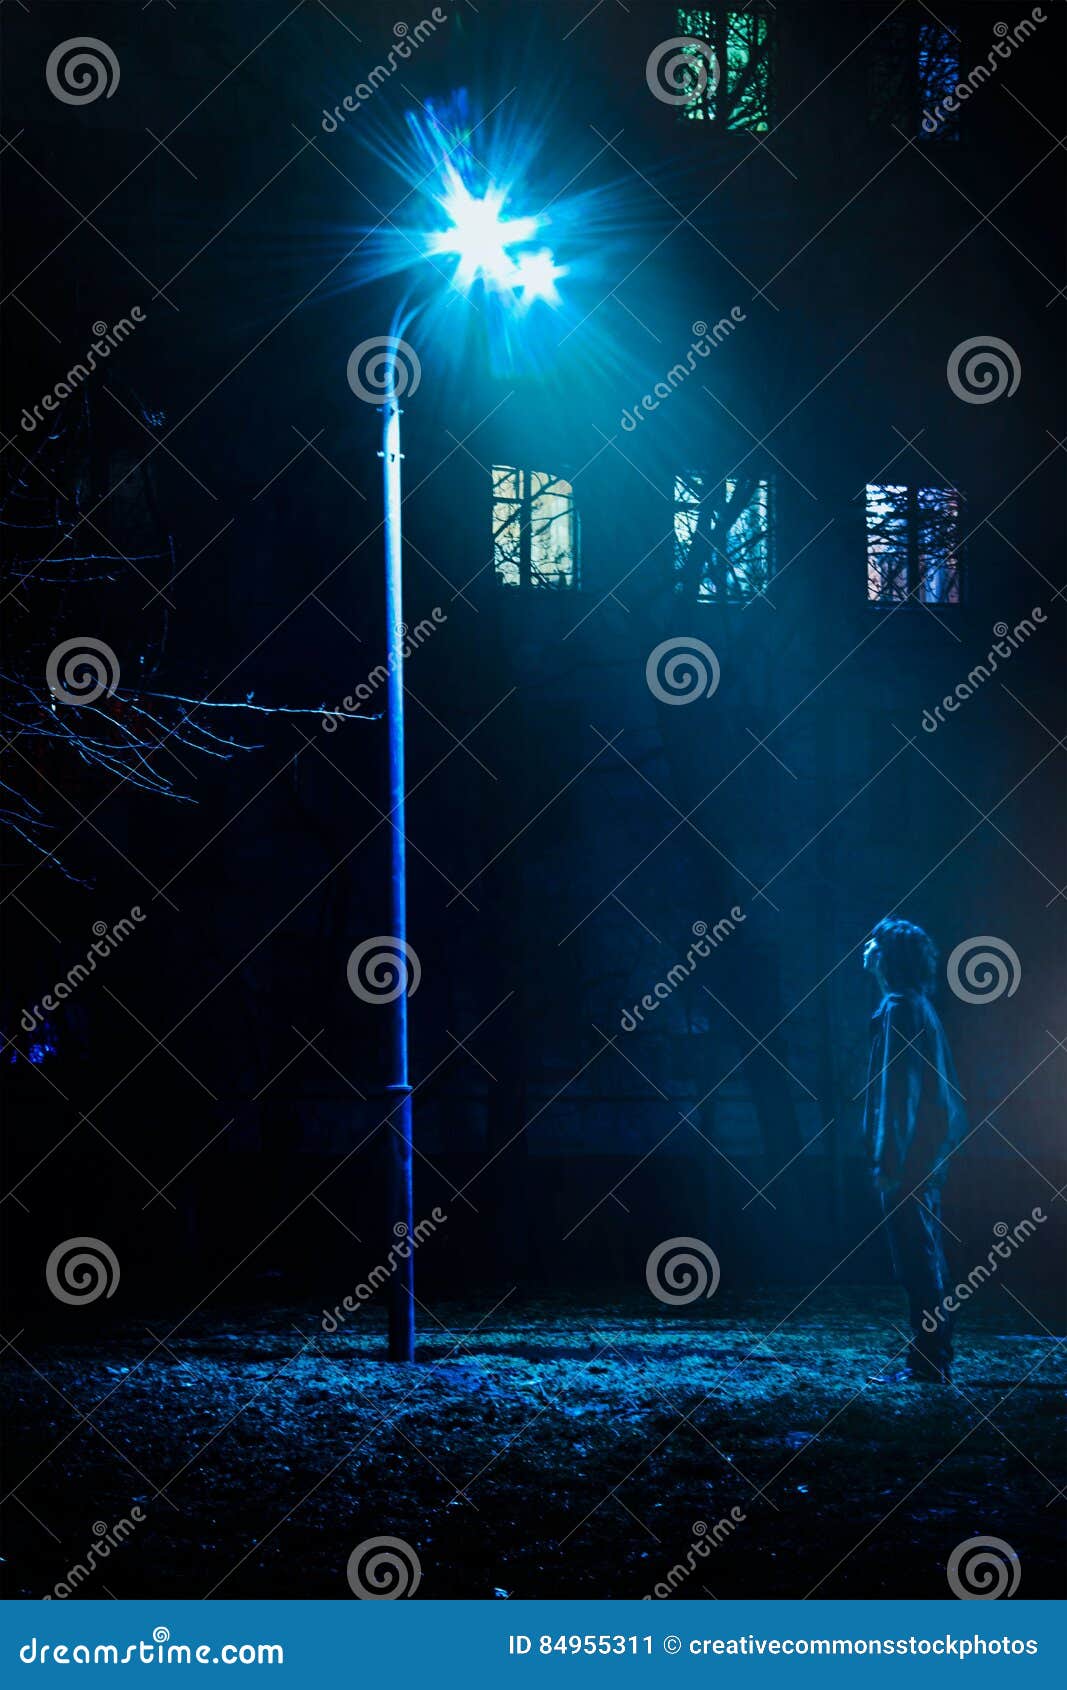 Man Standing In Front Of Street Light Turned On Picture. Image: 84955311